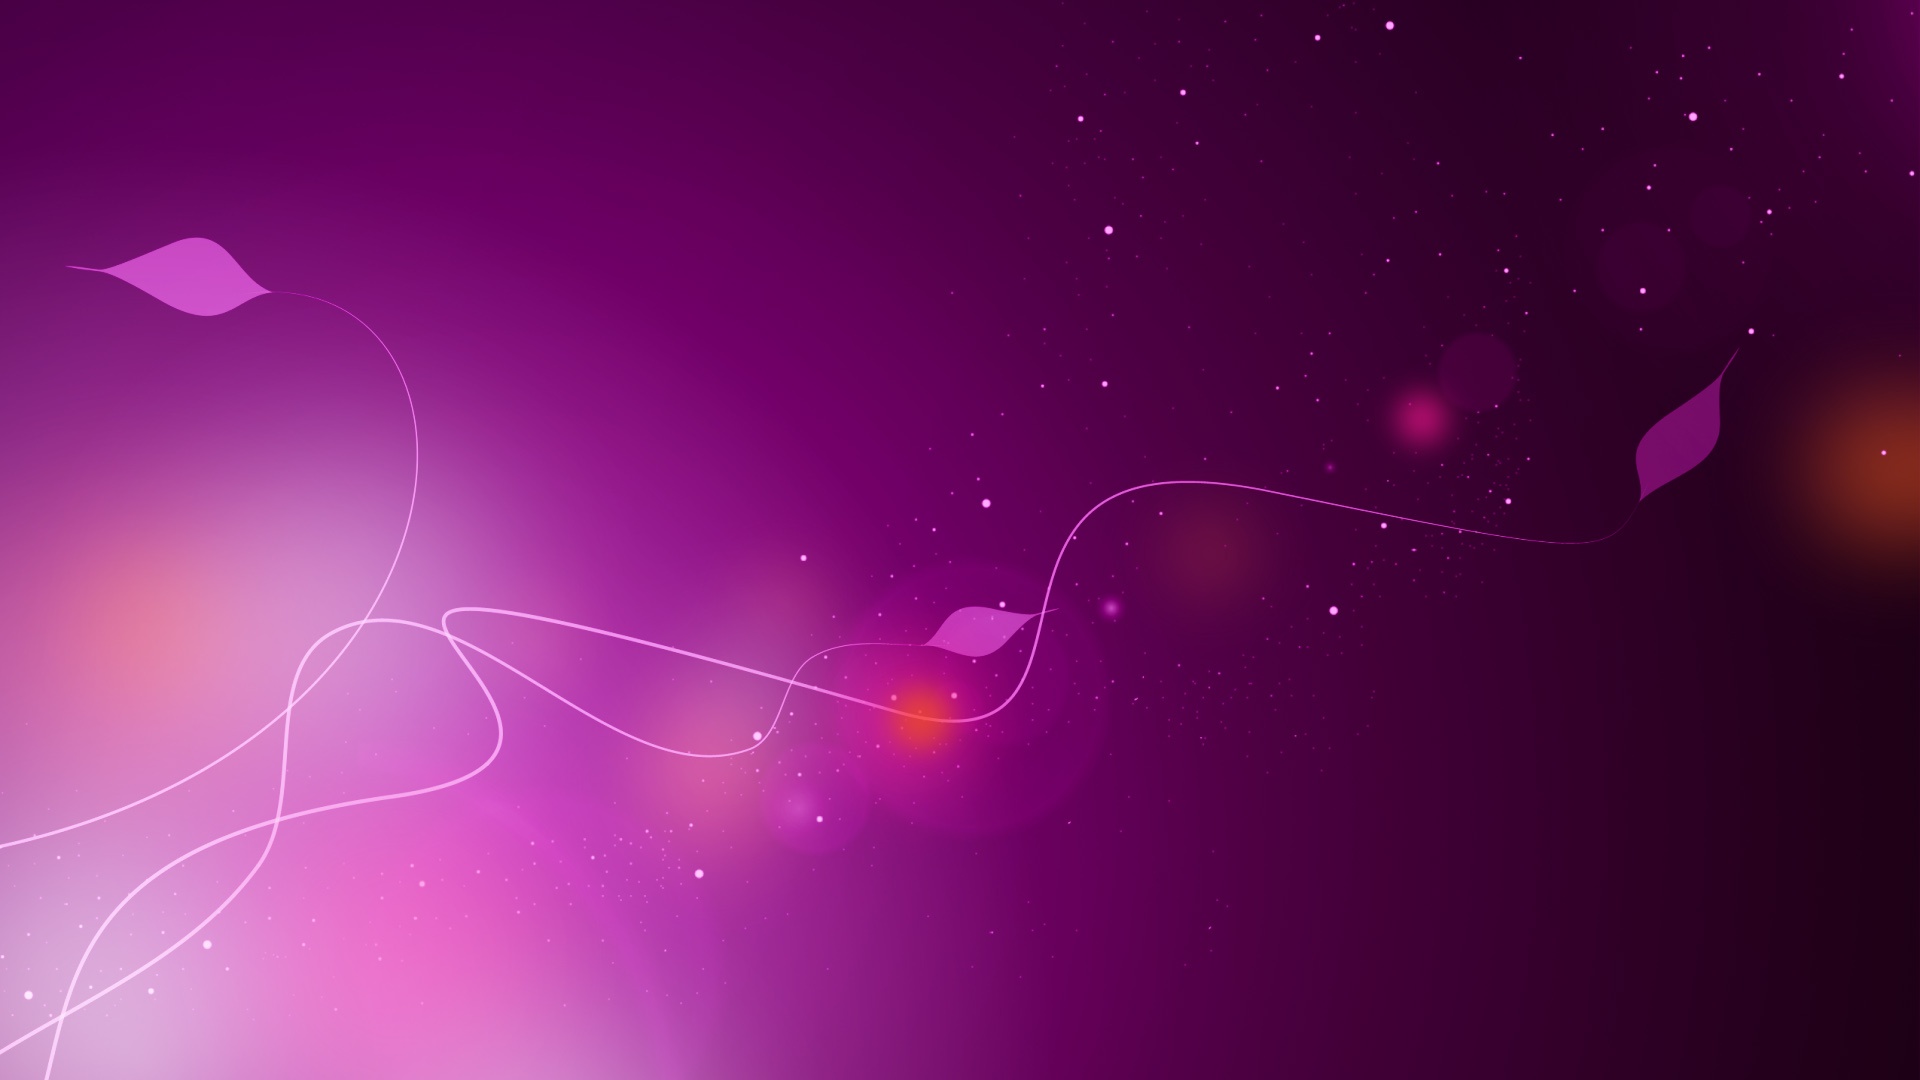 abstract wallpapers hd purple